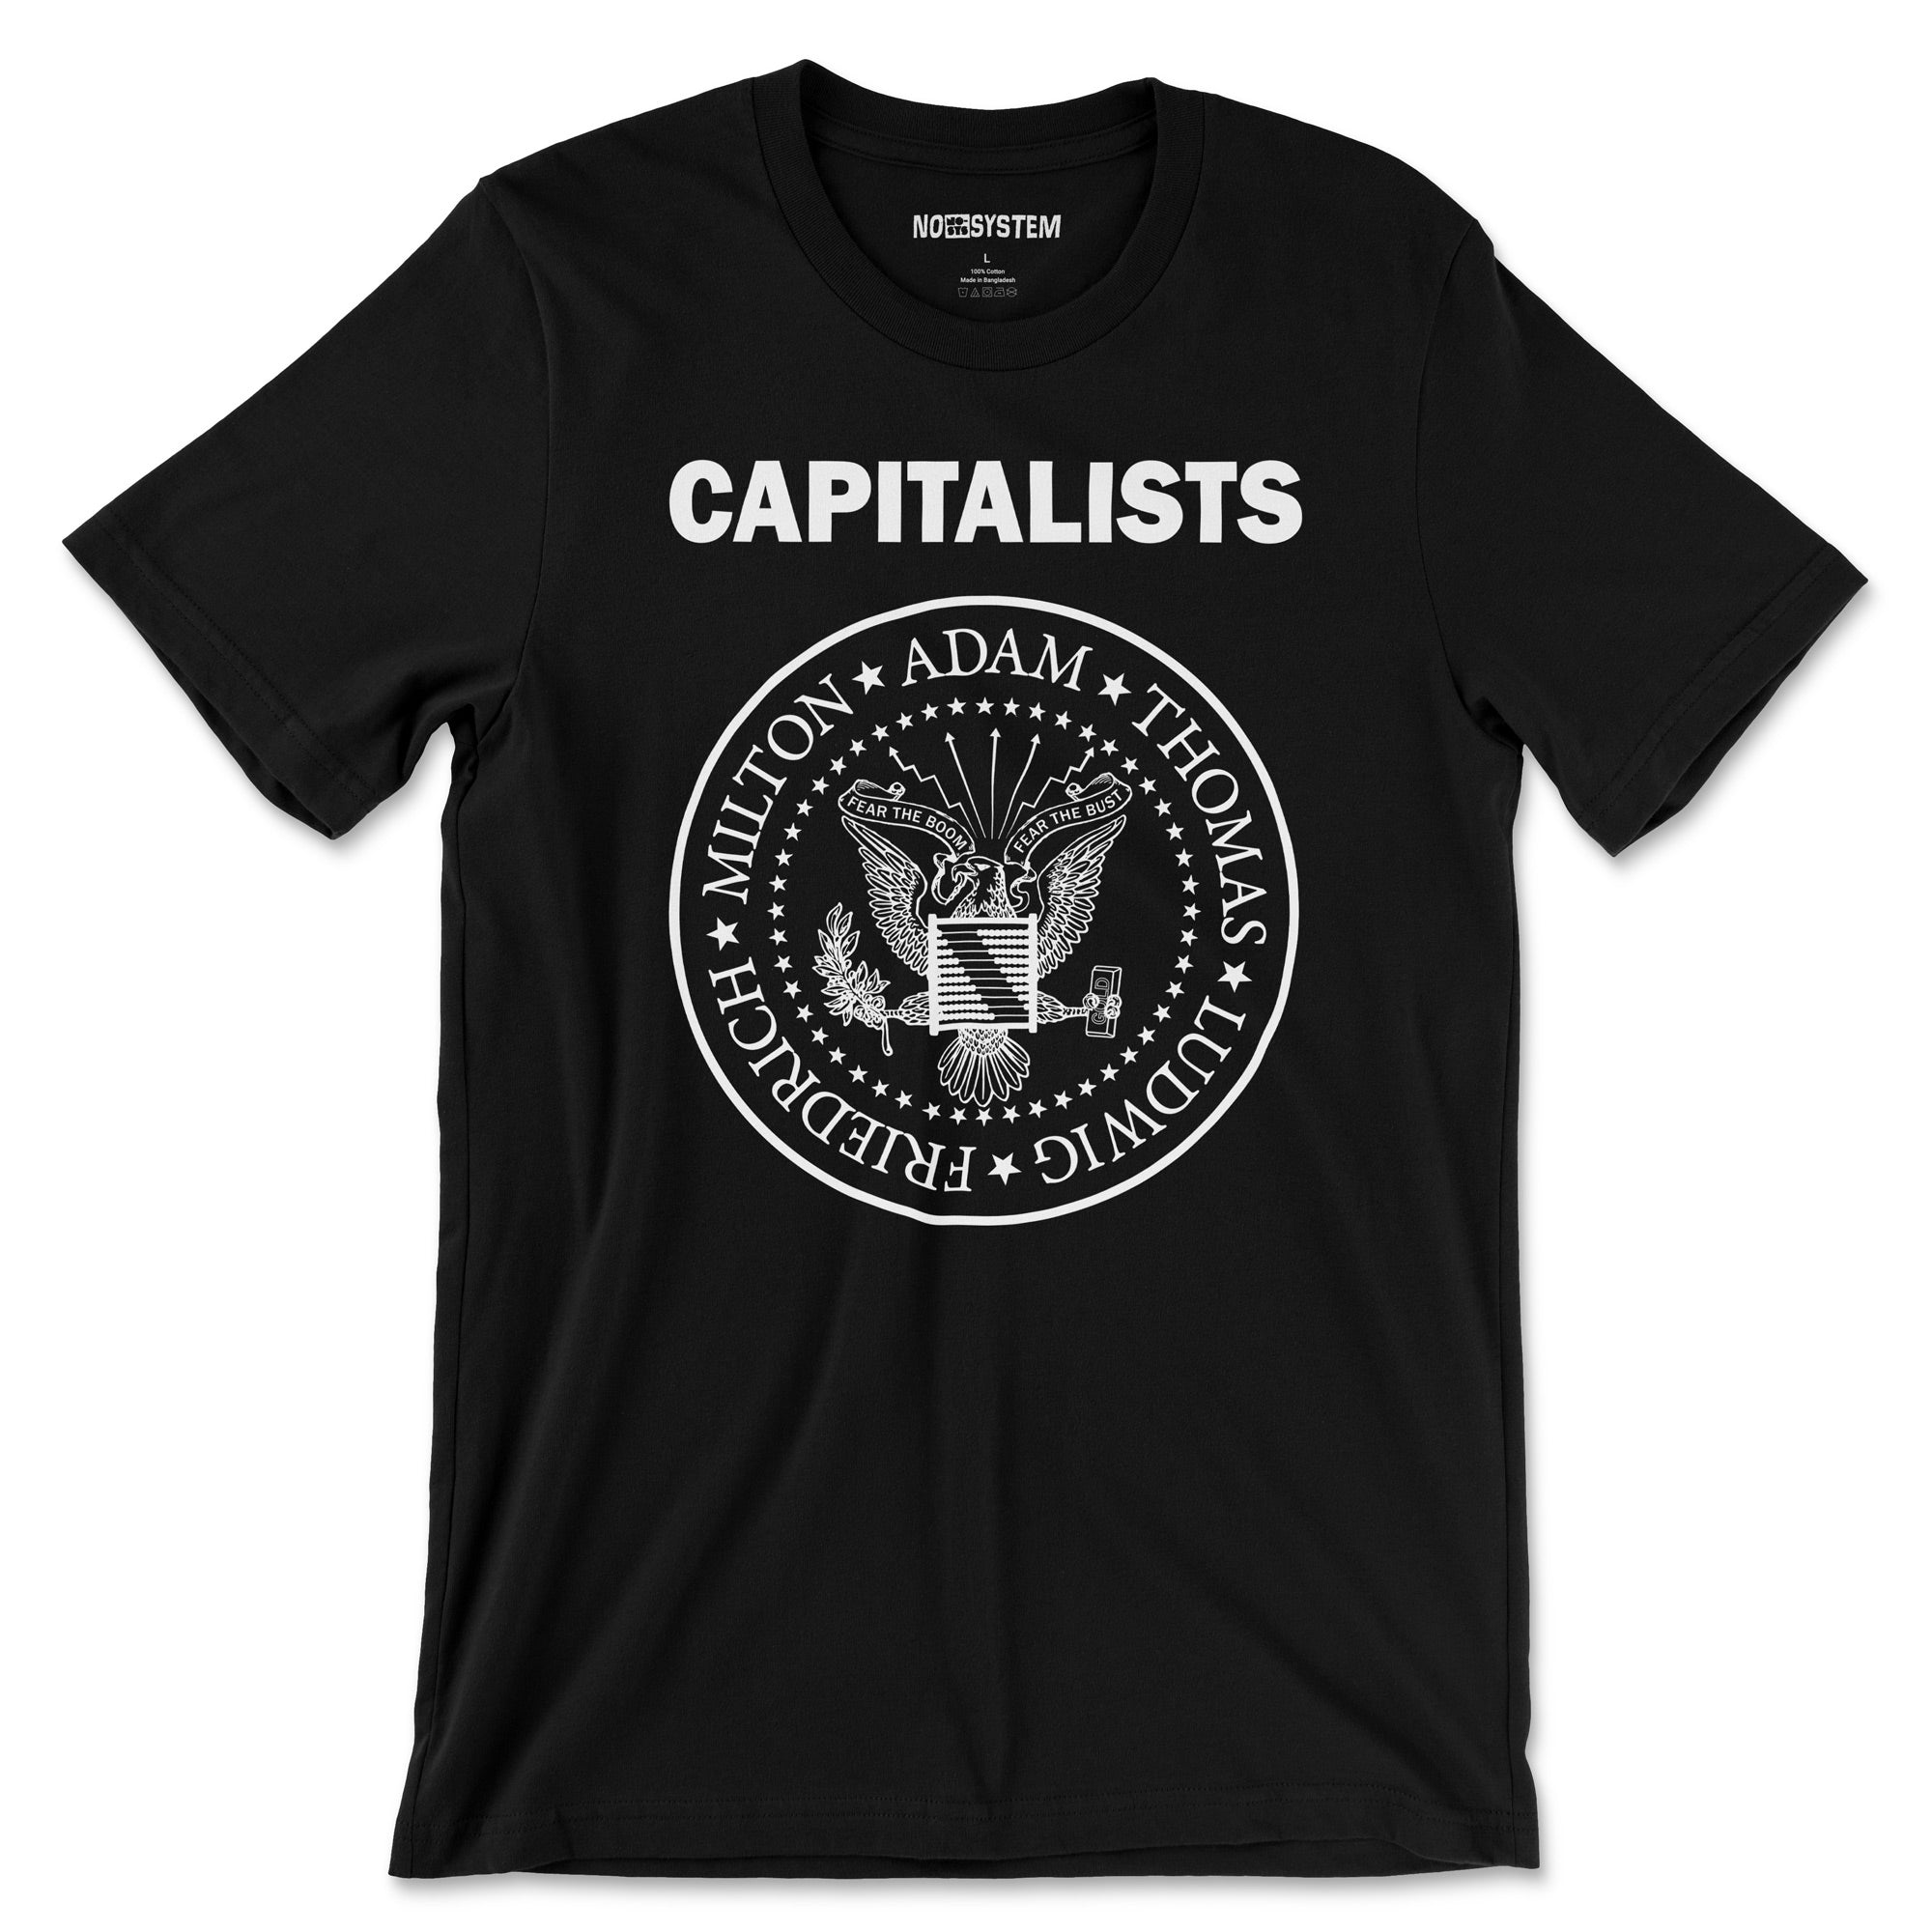 The Capitalists